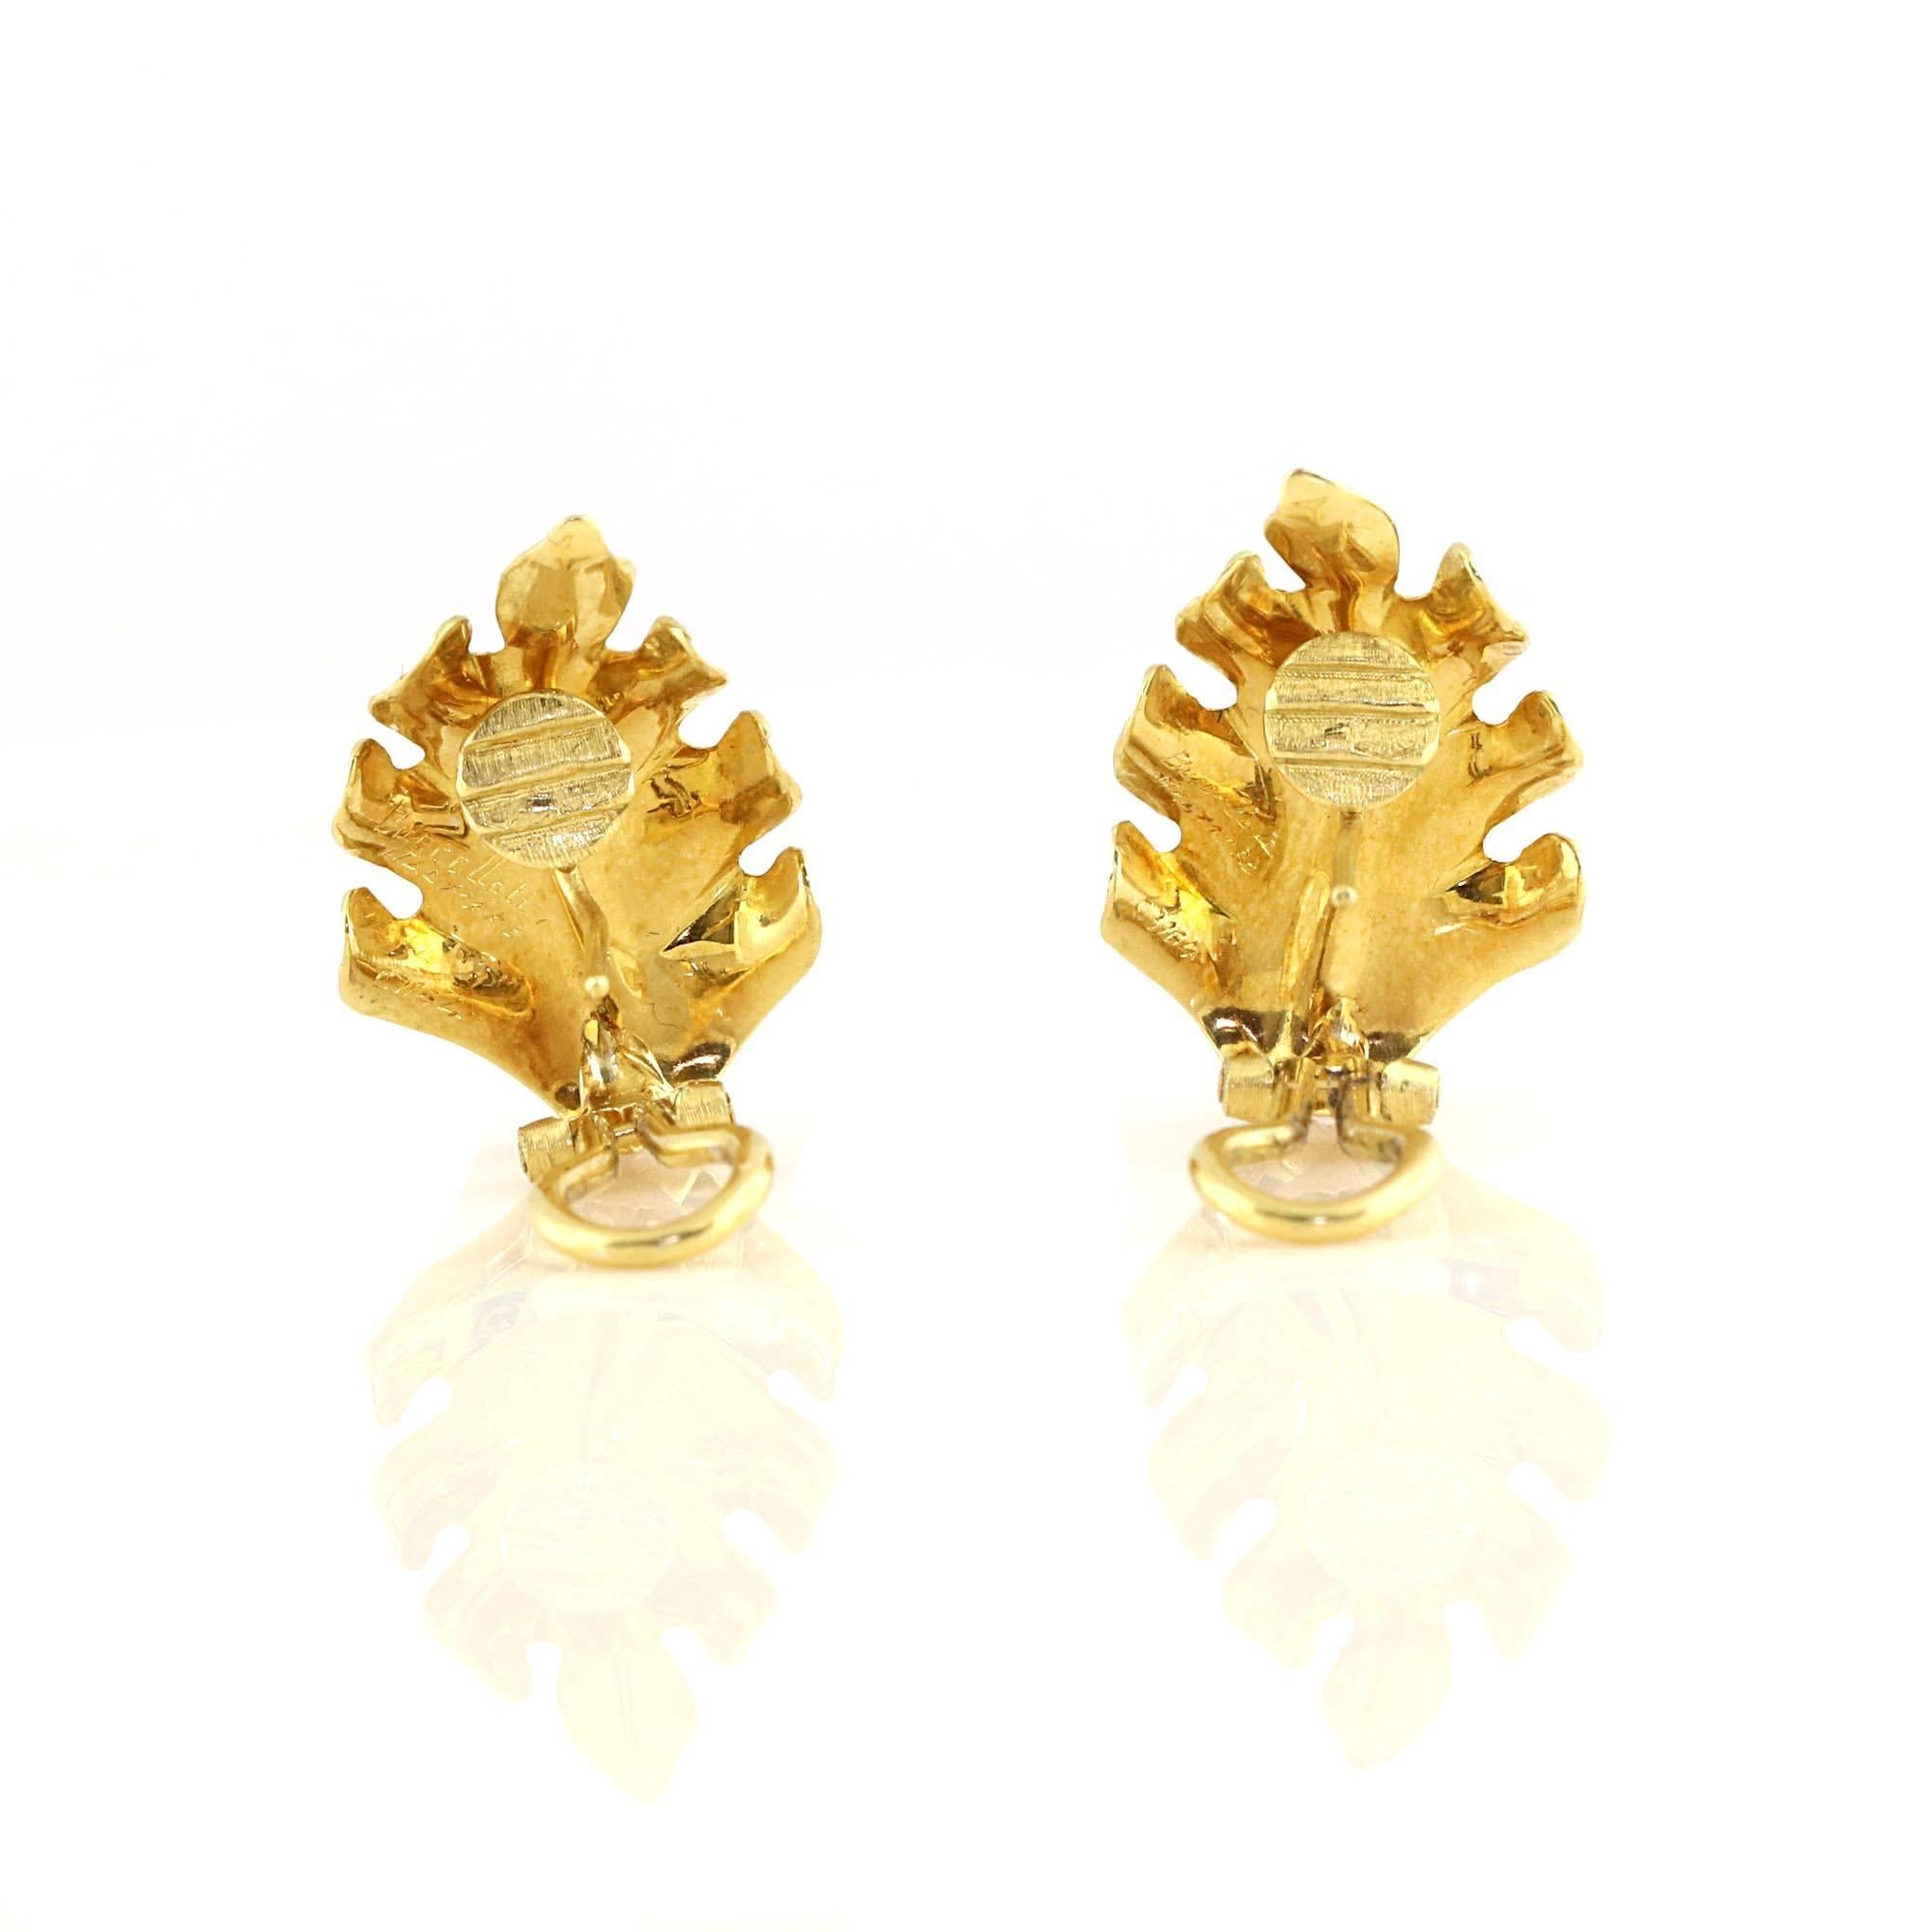 Buccellati 18K Yellow Gold and White Gold Leaf Motif Earrings Features:

Brand: Buccellati

Gender: Womens

Condition: Excellent 

Metal: 18K Yellow Gold and White Gold 

Weight: 7.17 grams

Hallmarks: Buccellati 750